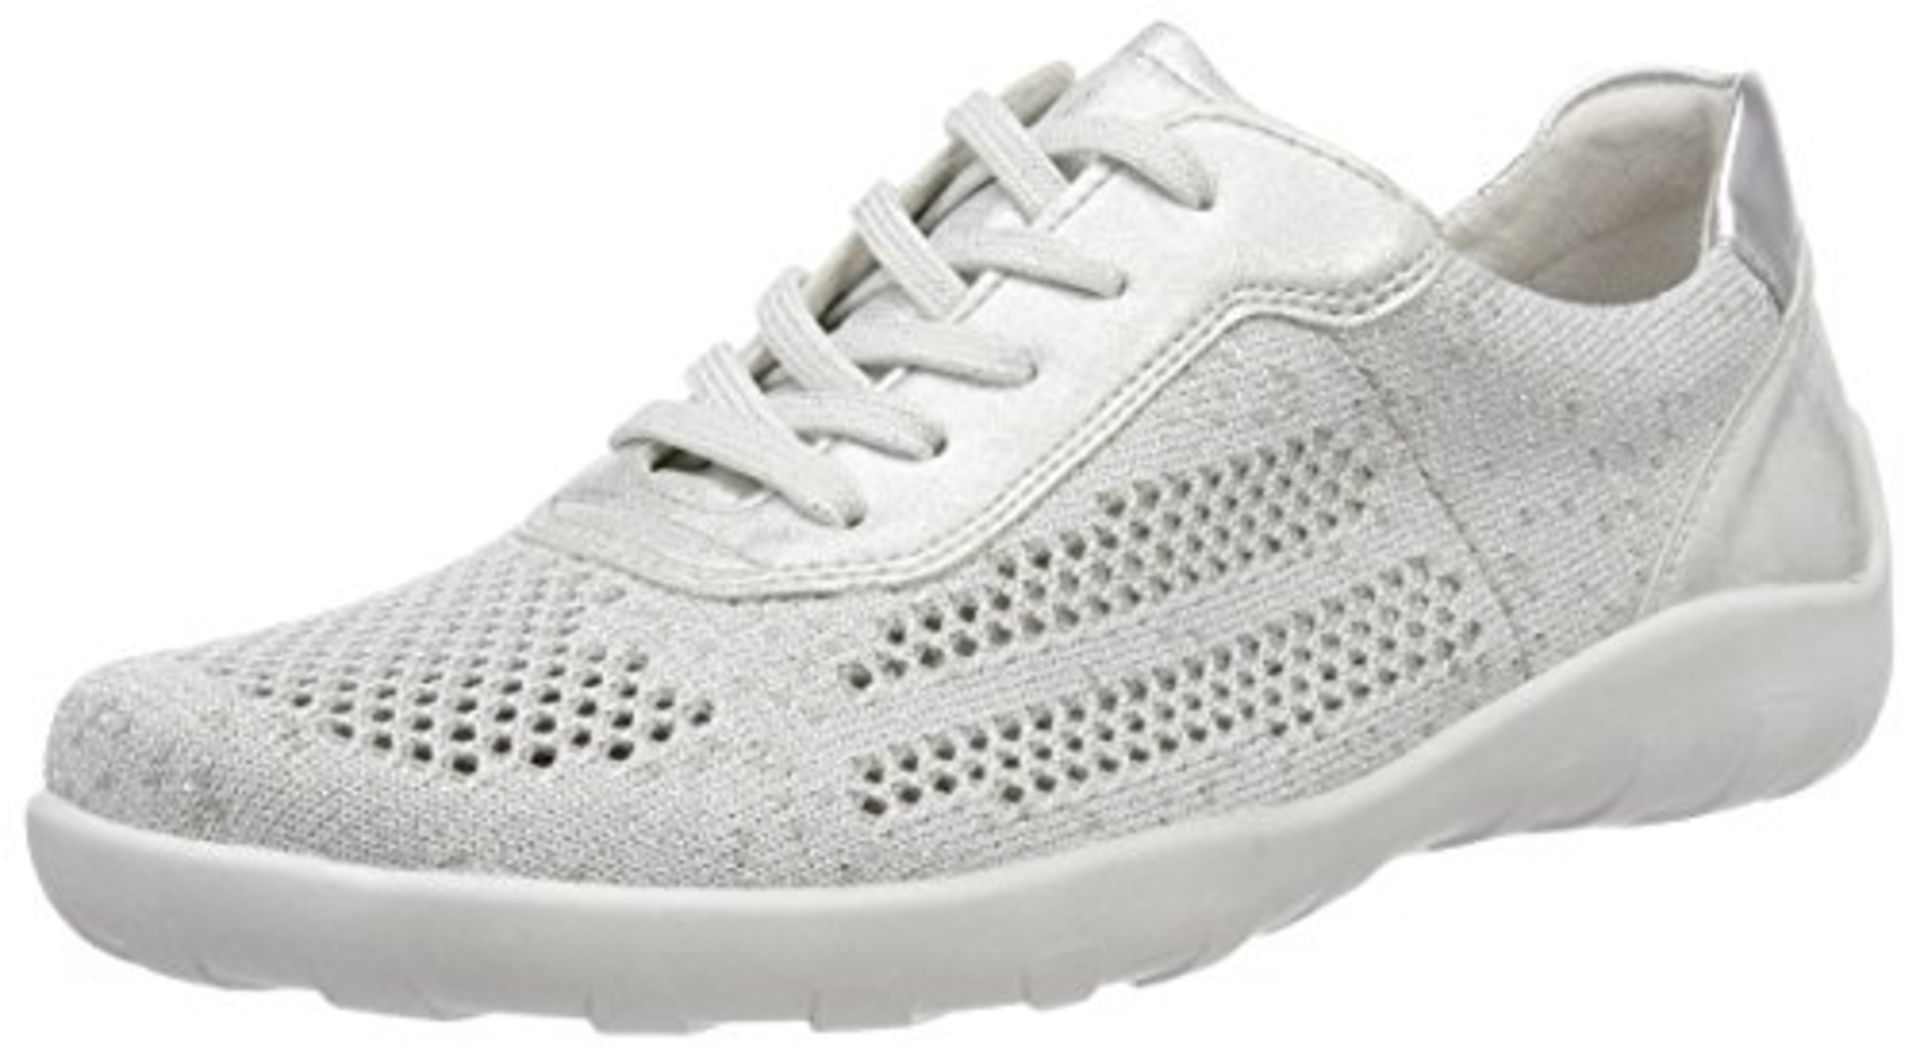 Remonte Women's R3503 Trainers White Ice/Silver 80 3.5 UK 3.5 UK Women’s R3503_80 |4059954591863